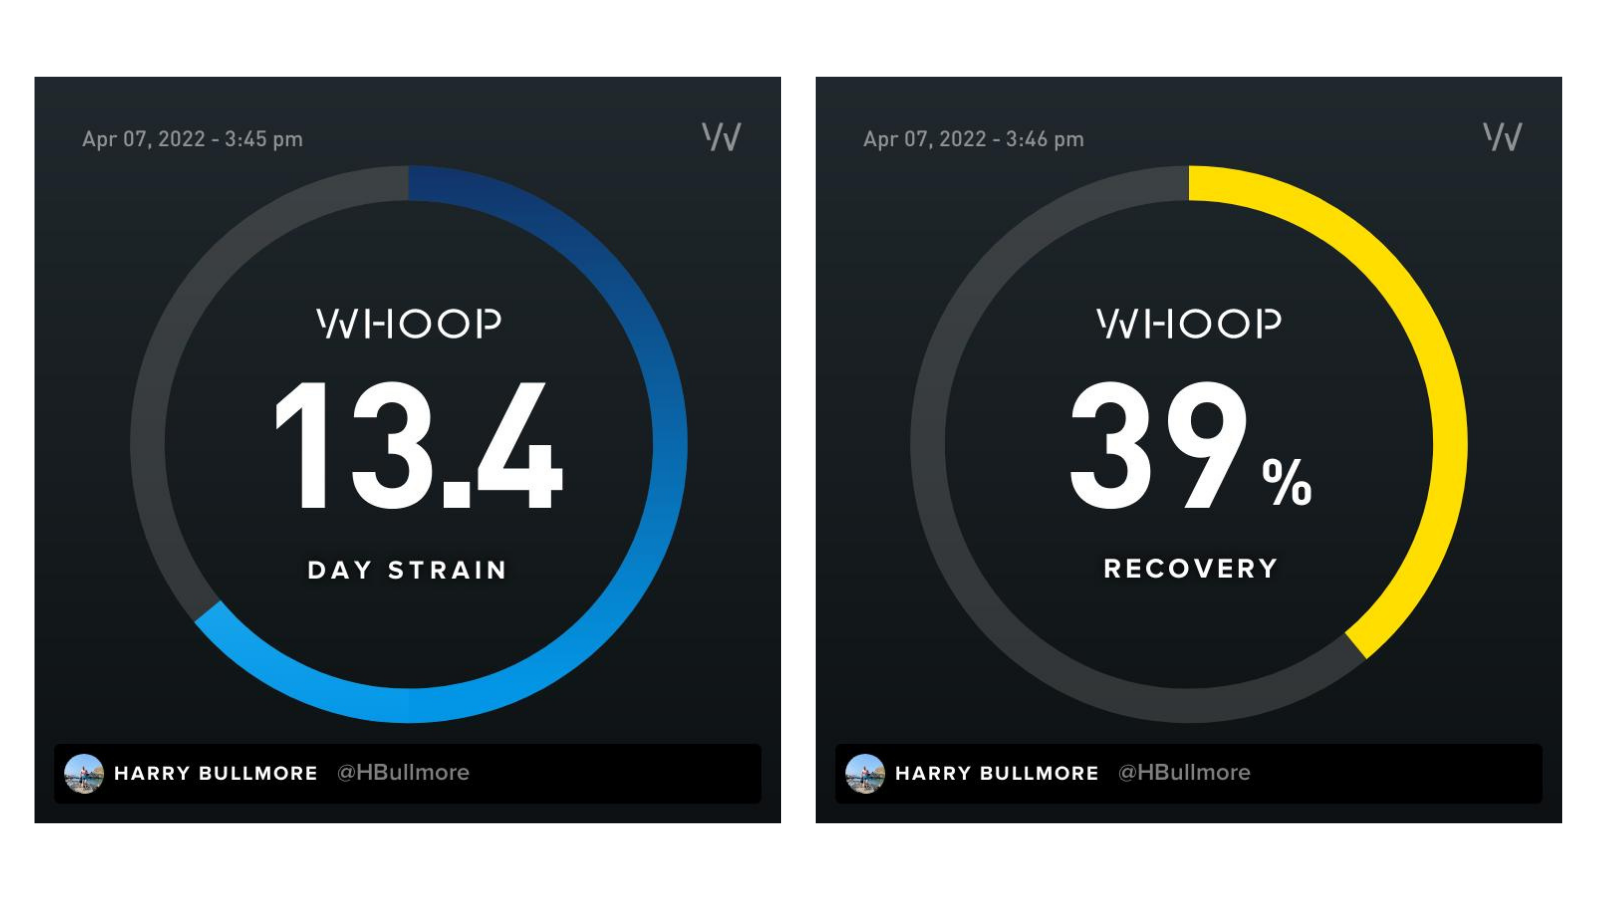 The Whoop 4.0 band displays your daily strain and recovery scores on its app